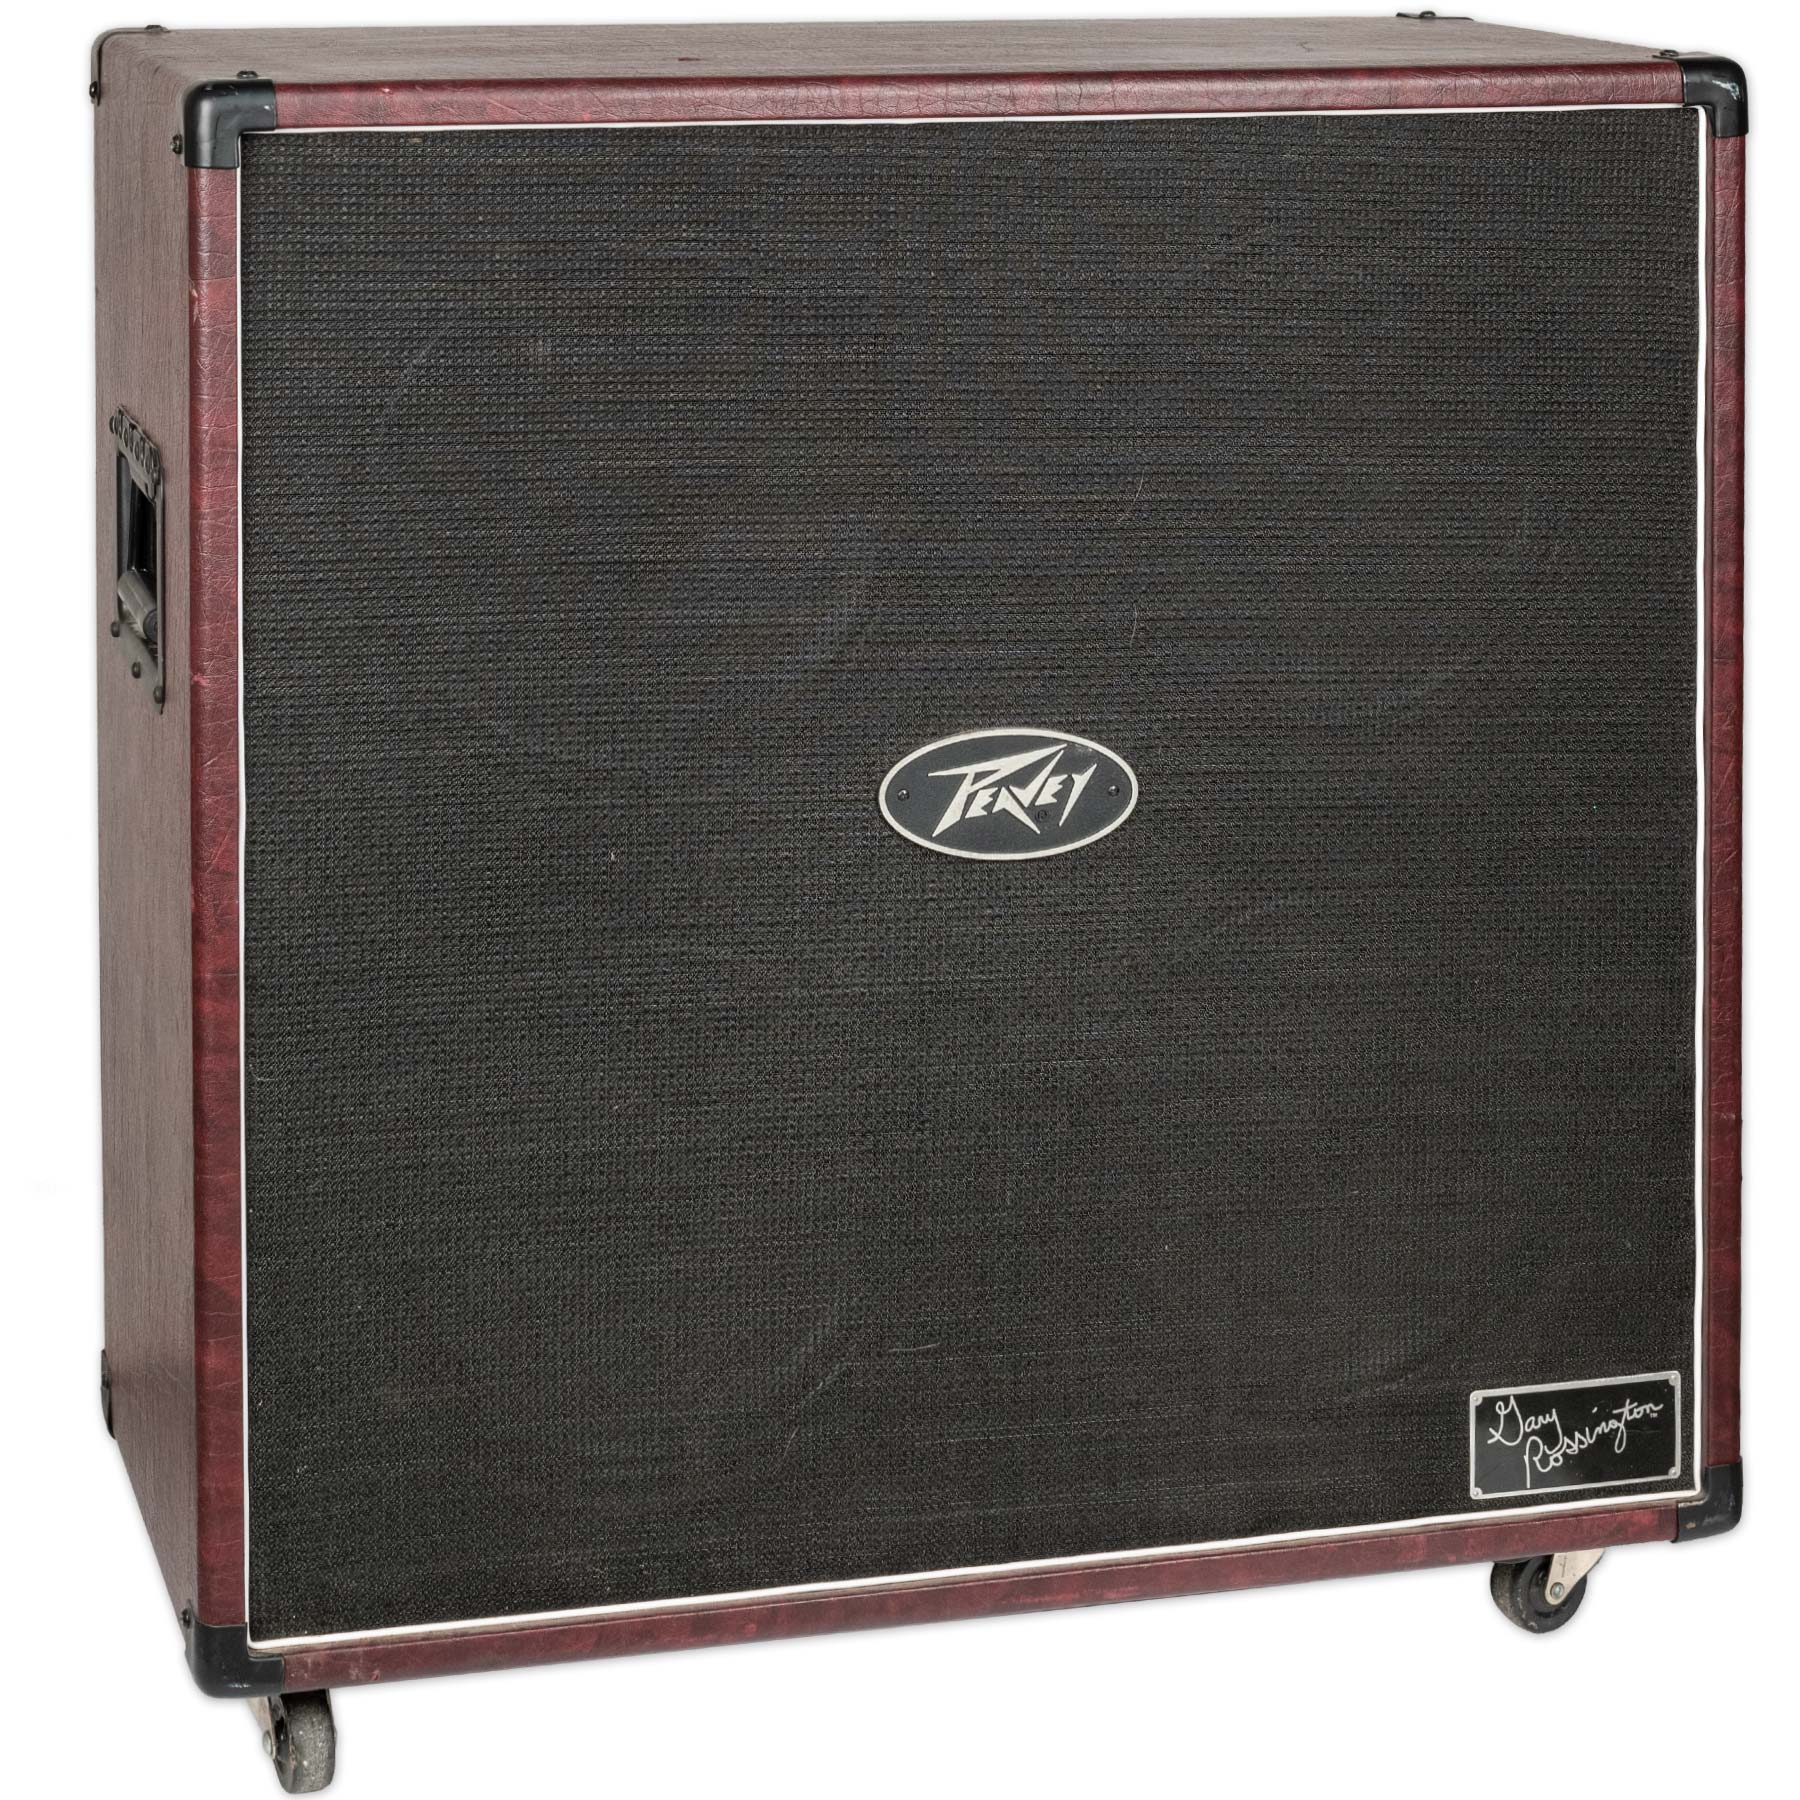 Used Peavey Gary Rossington 4x12 Cabinet Stang Guitars